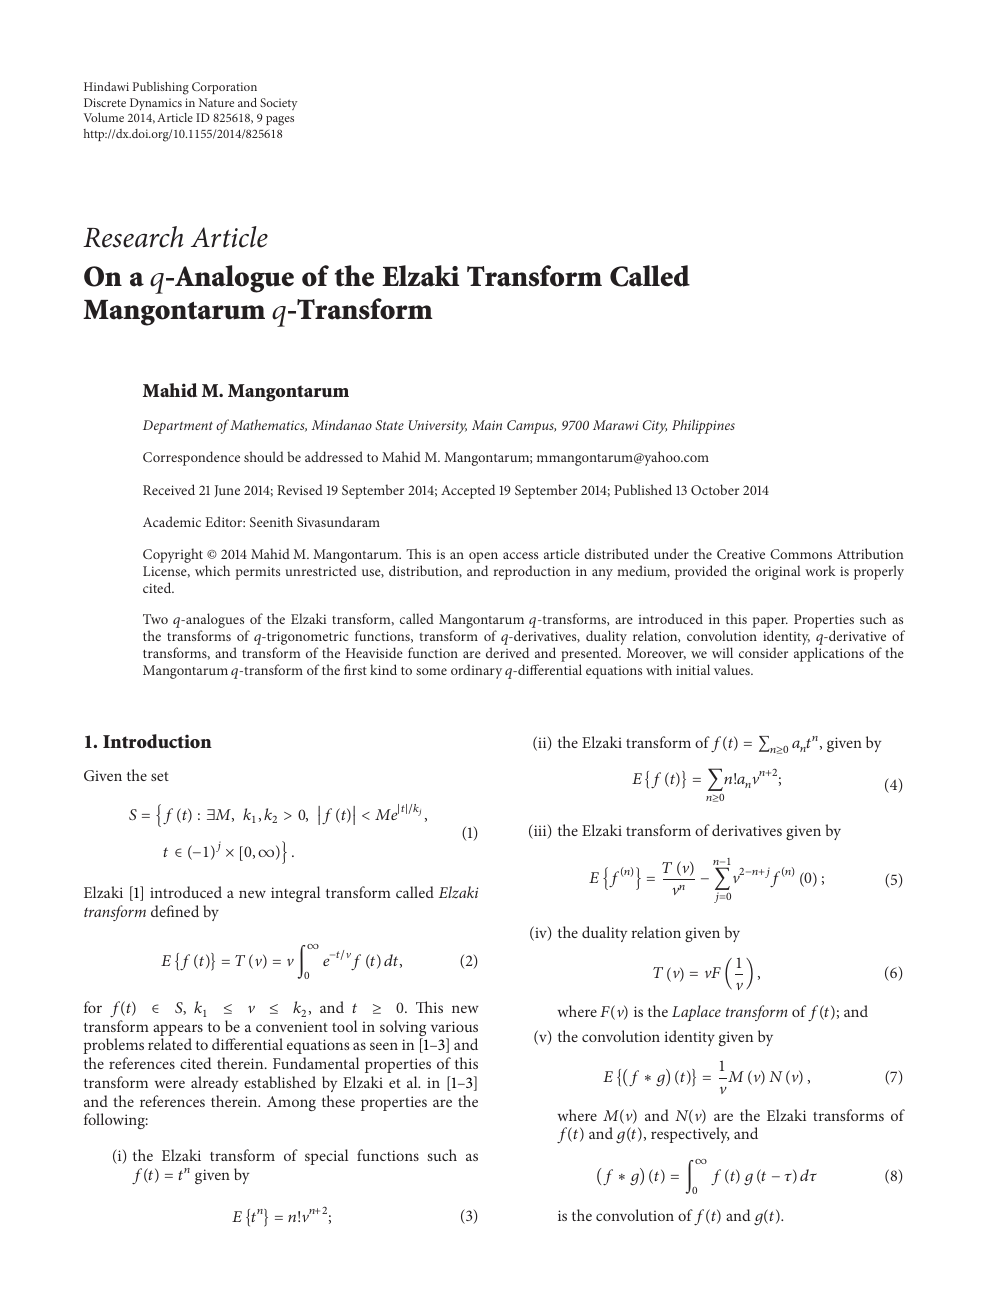 On A Q Analogue Of The Elzaki Transform Called Mangontarum Q Transform Topic Of Research Paper In Mathematics Download Scholarly Article Pdf And Read For Free On Cyberleninka Open Science Hub